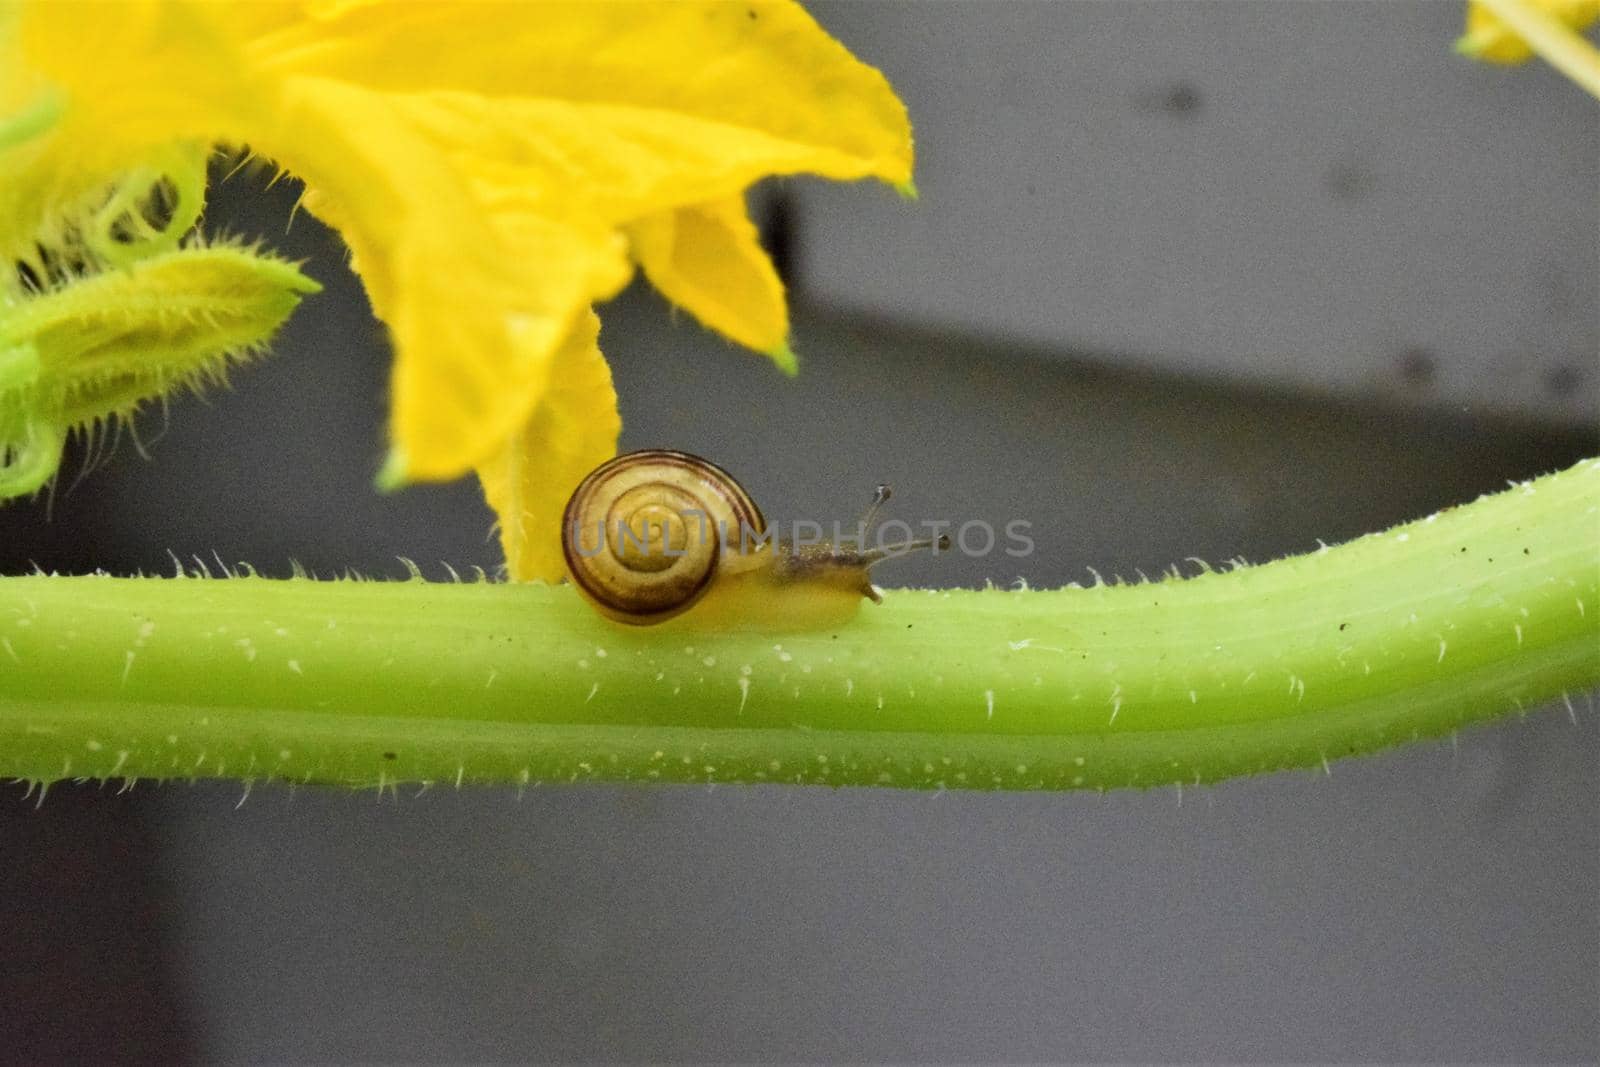 Little housing screw on a cucumber plant by Luise123